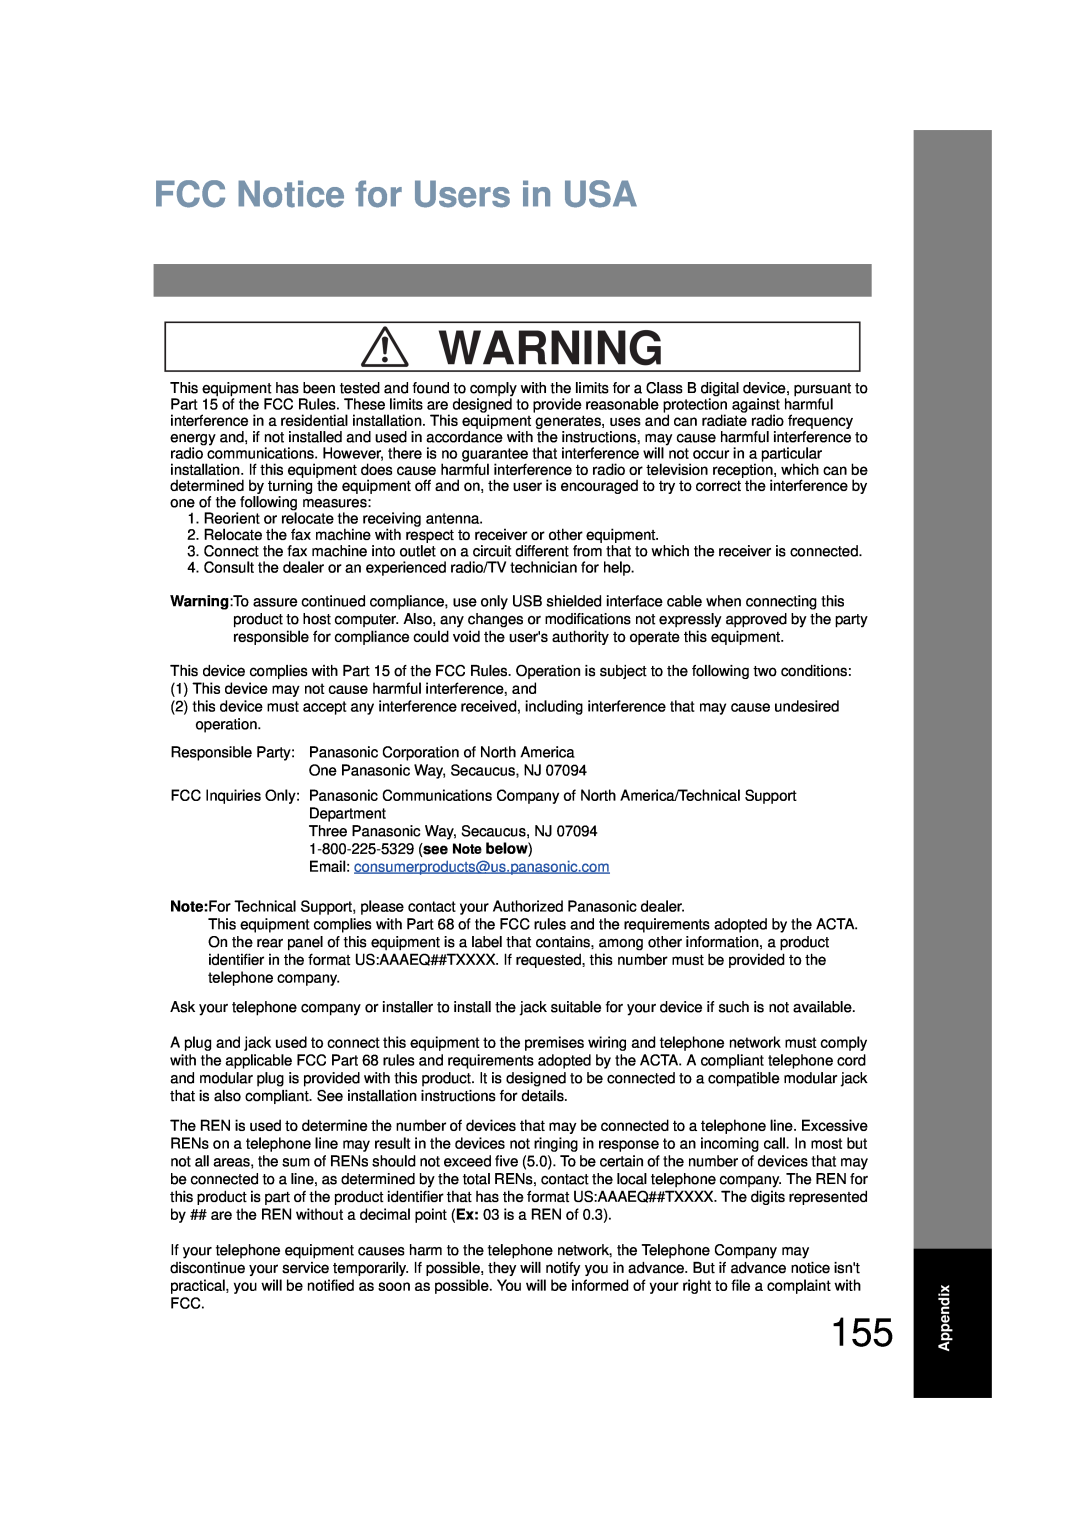 Panasonic UF-6200 operating instructions FCC Notice for Users in USA, Email consumerproducts@us.panasonic.com, Appendix 